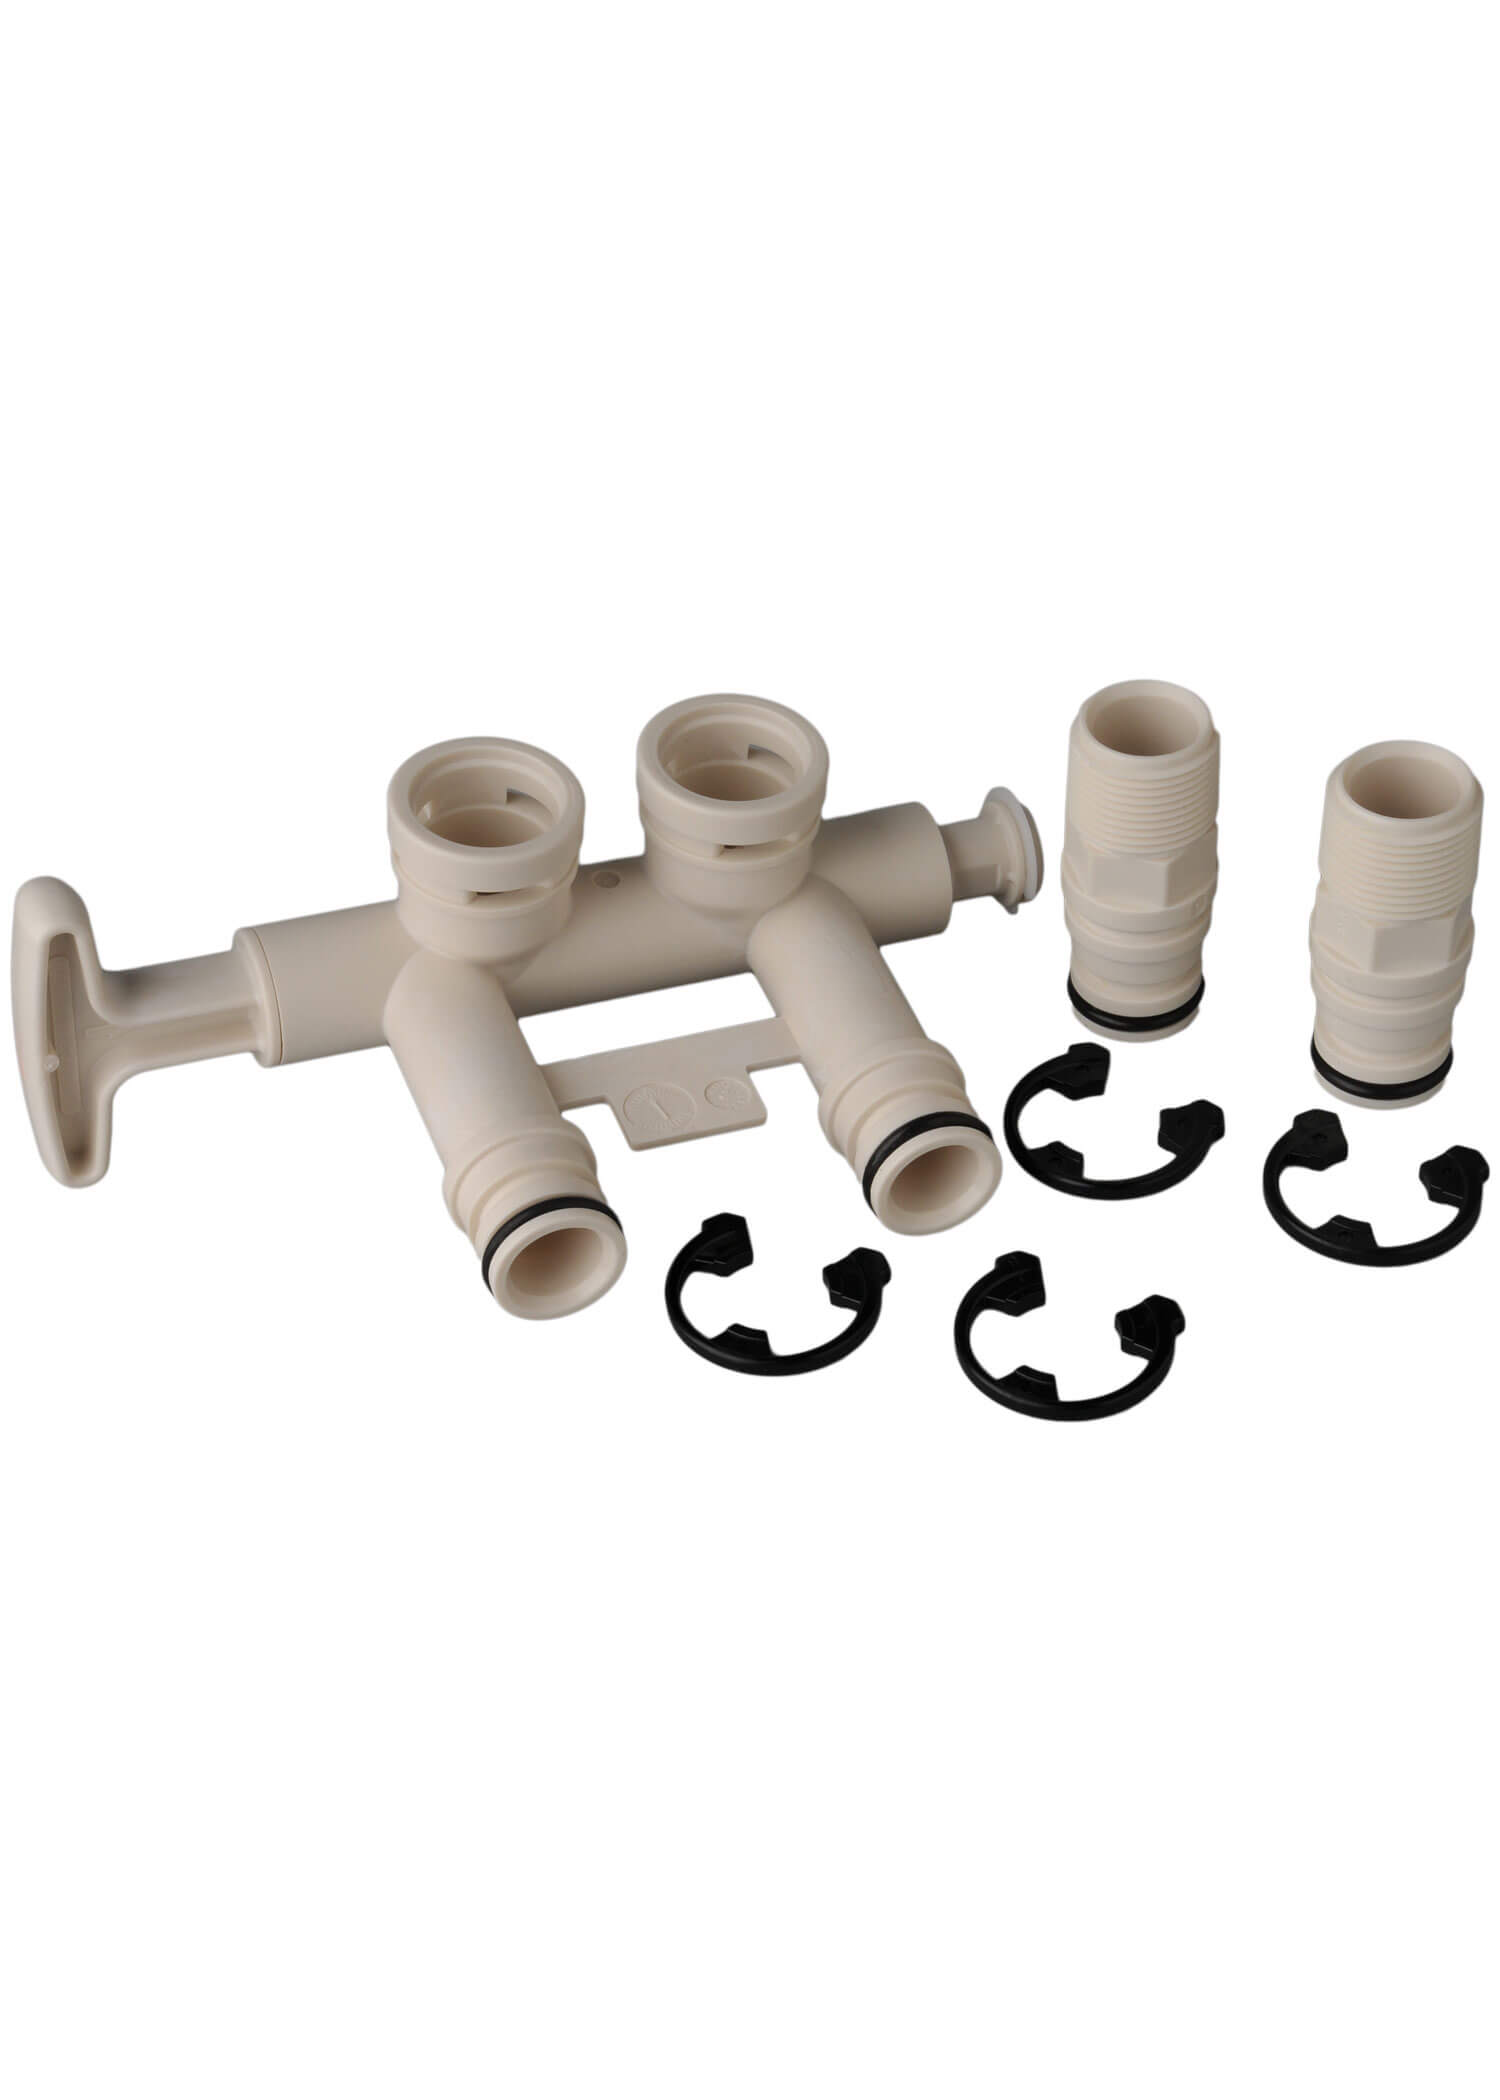 A large plastic assembly, four retaining clips, and two adaptor tubes all in plastic, for connecting a water softener to a house water system